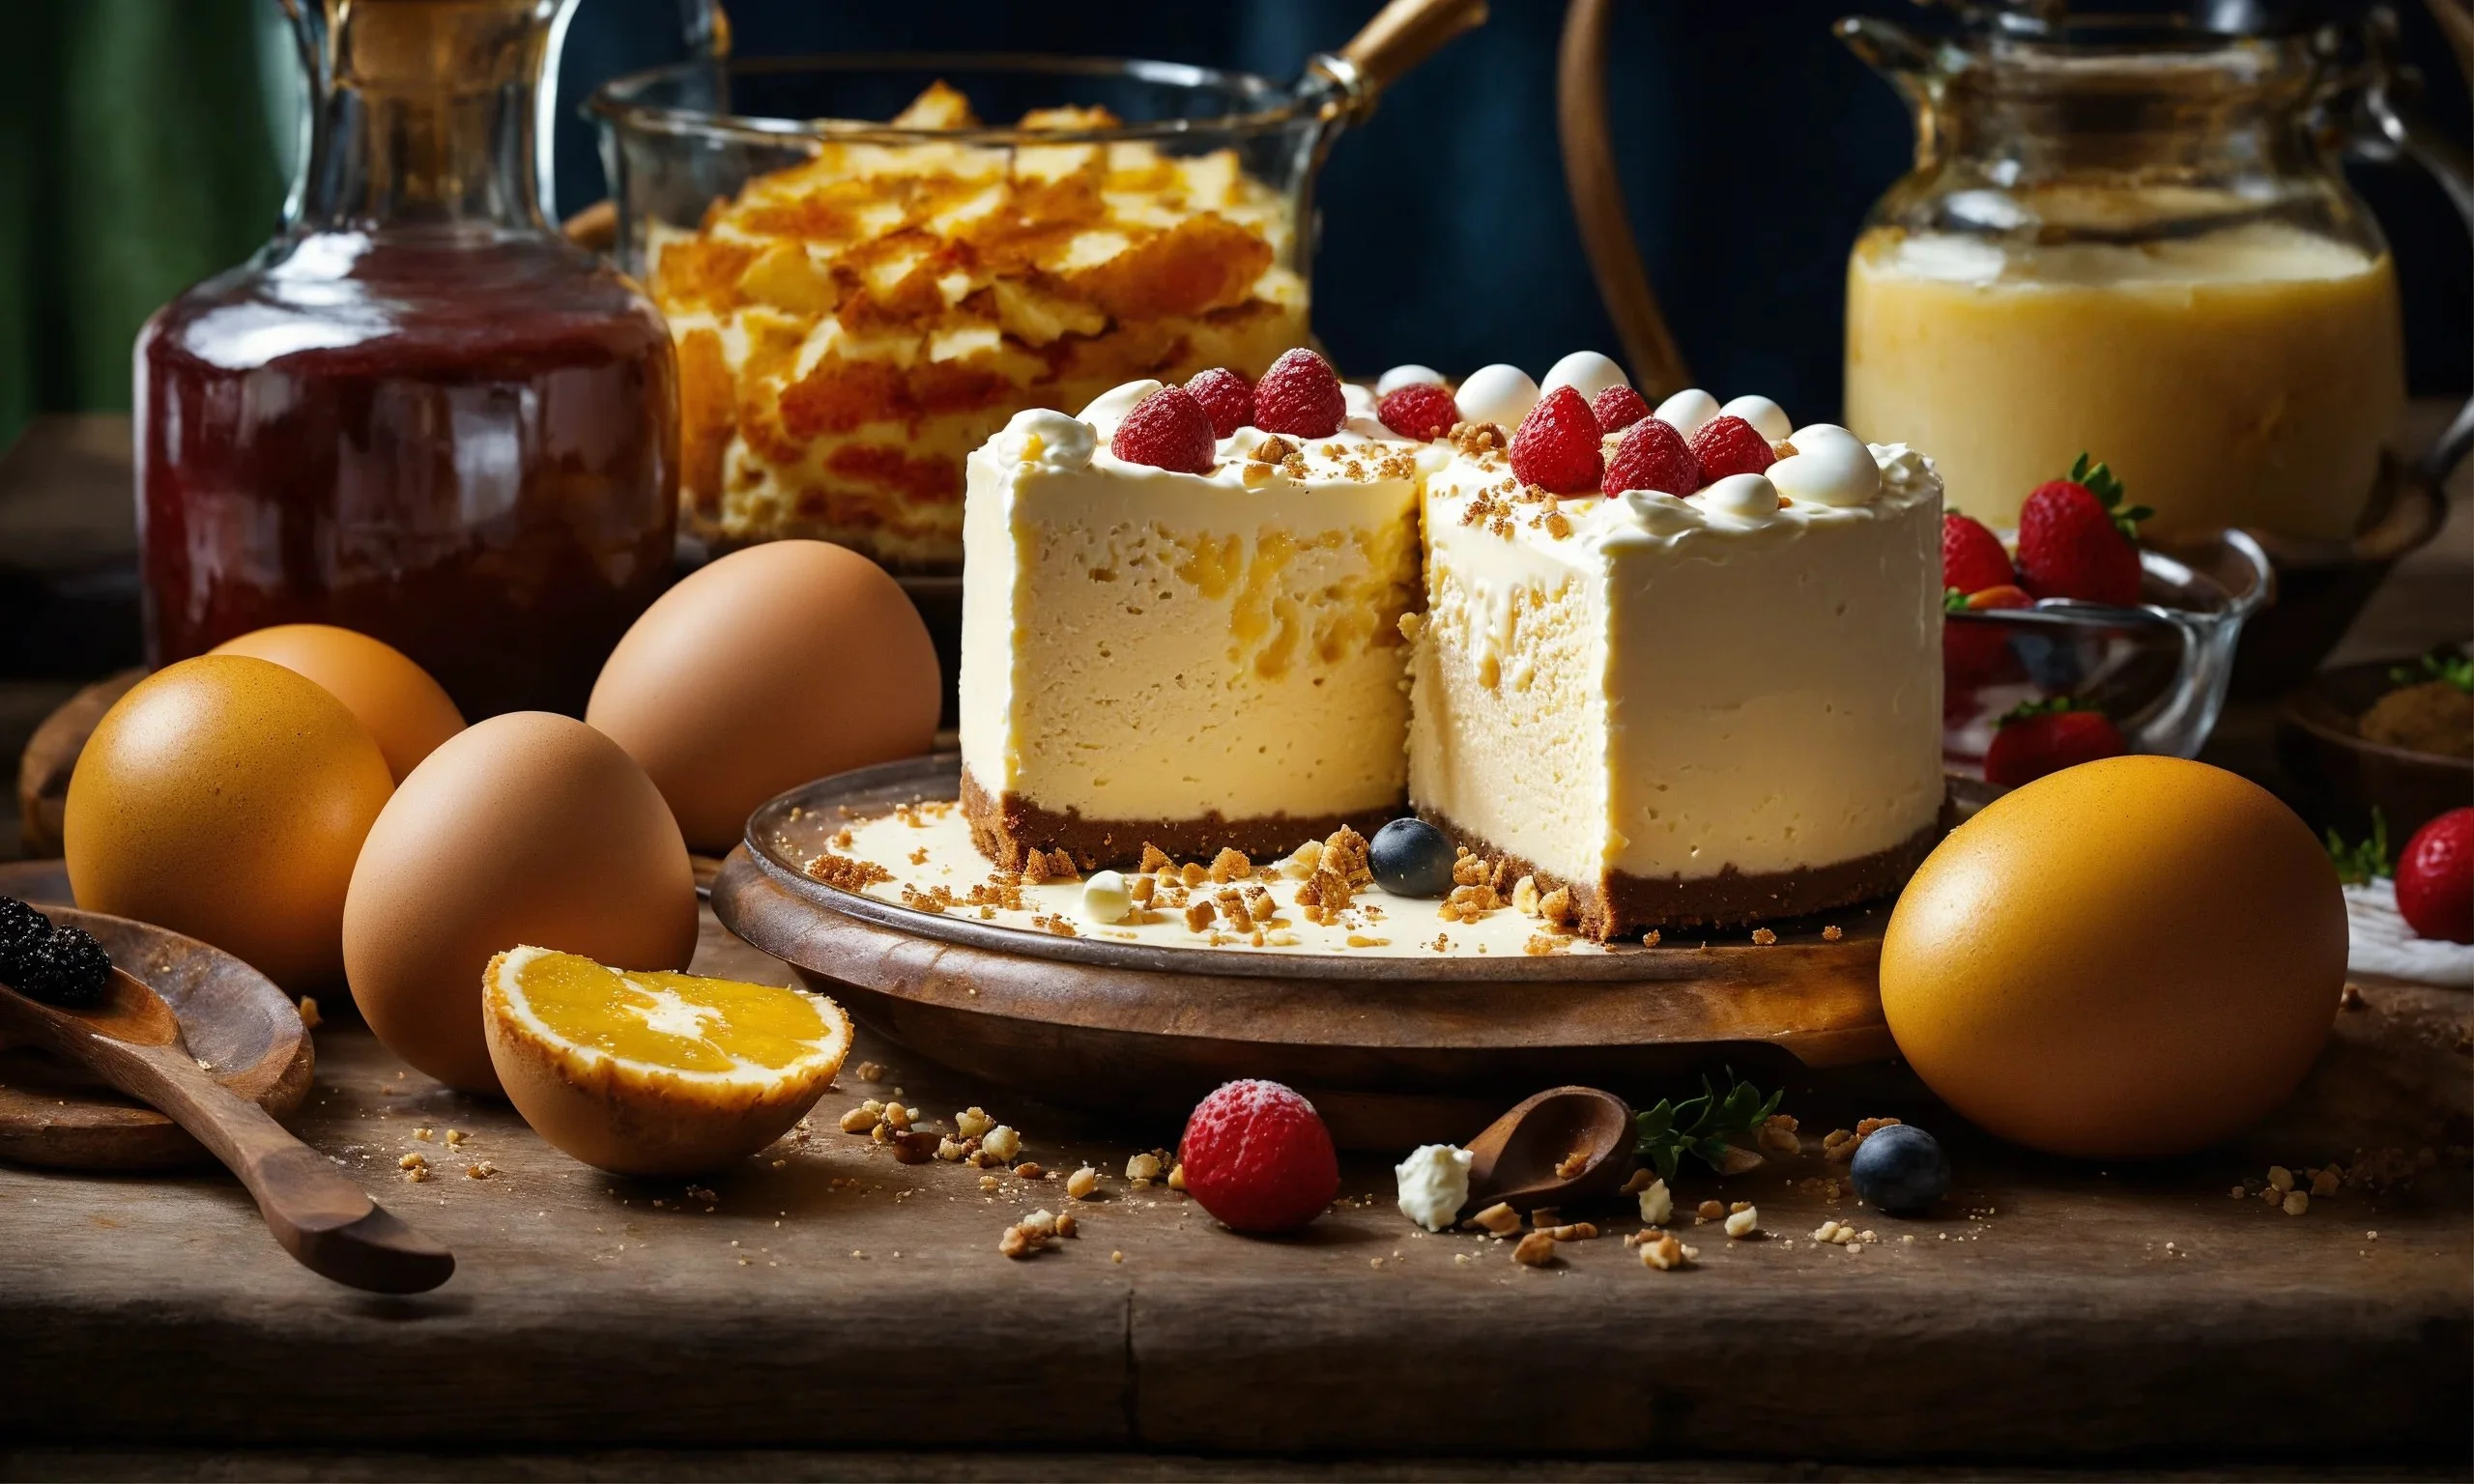 Learn to make the perfect Philadelphia Cheesecake with our easy recipe. Enjoy creamy, rich, and delicious slices every time.